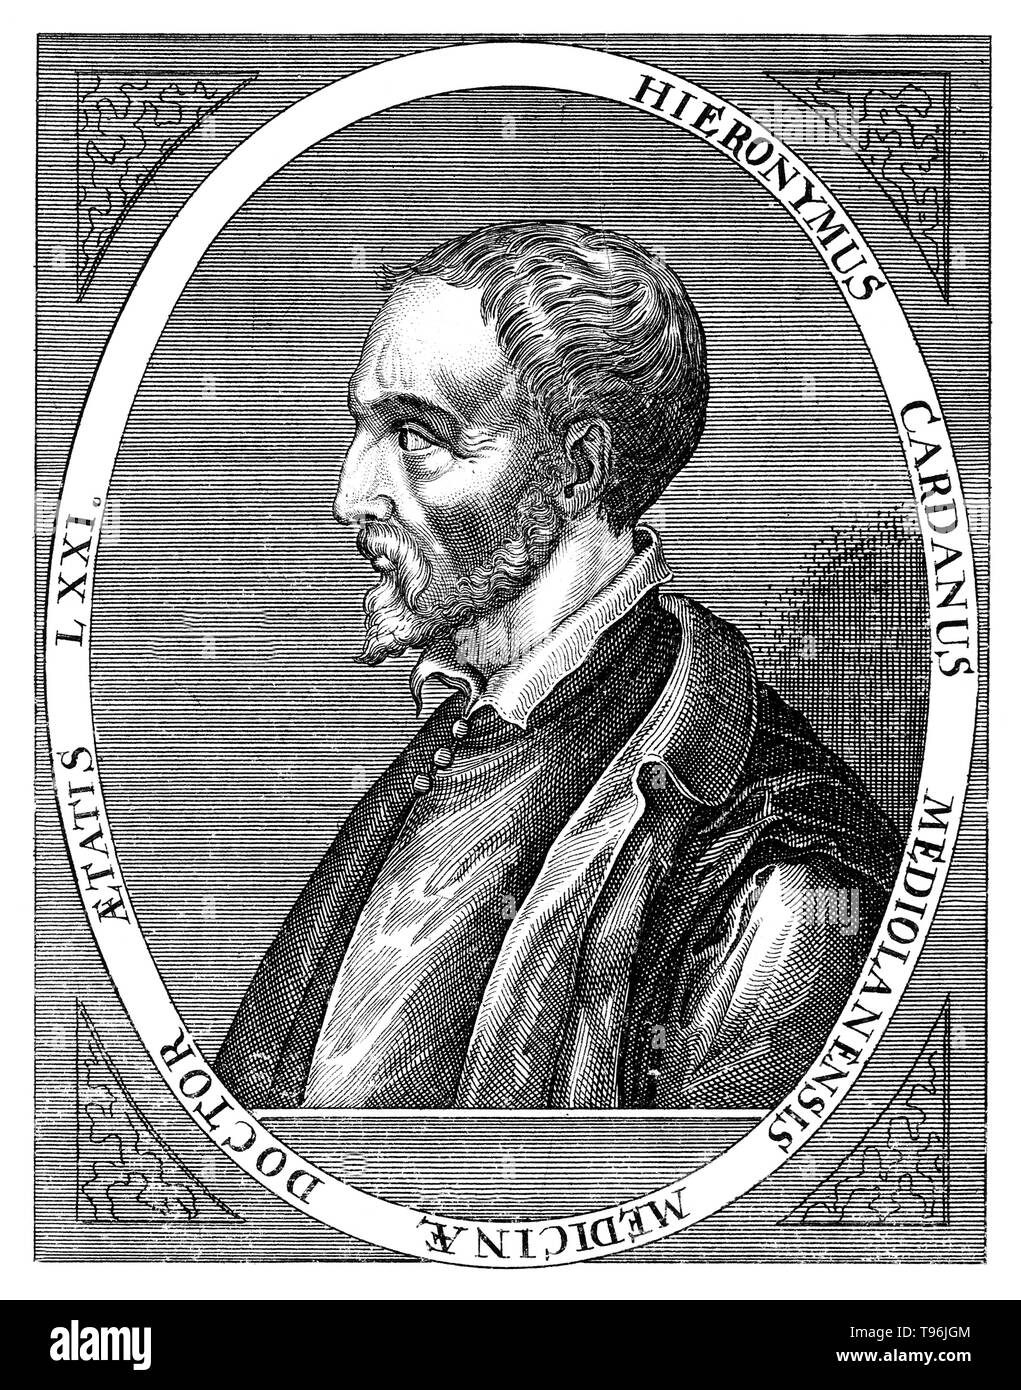 Gerolamo Cardano (September 24, 1501 - September 21, 1576) was an Italian polymath, whose interests ranged from being a mathematician, physician, biologist, physicist, chemist, astrologer, astronomer, philosopher, writer, and gambler. He was one of the most influential mathematicians of the Renaissance, and was one of the key figures in the foundation of probability, of the binomial coefficients and the binomial theorem. He wrote more than 200 works on science. Stock Photo